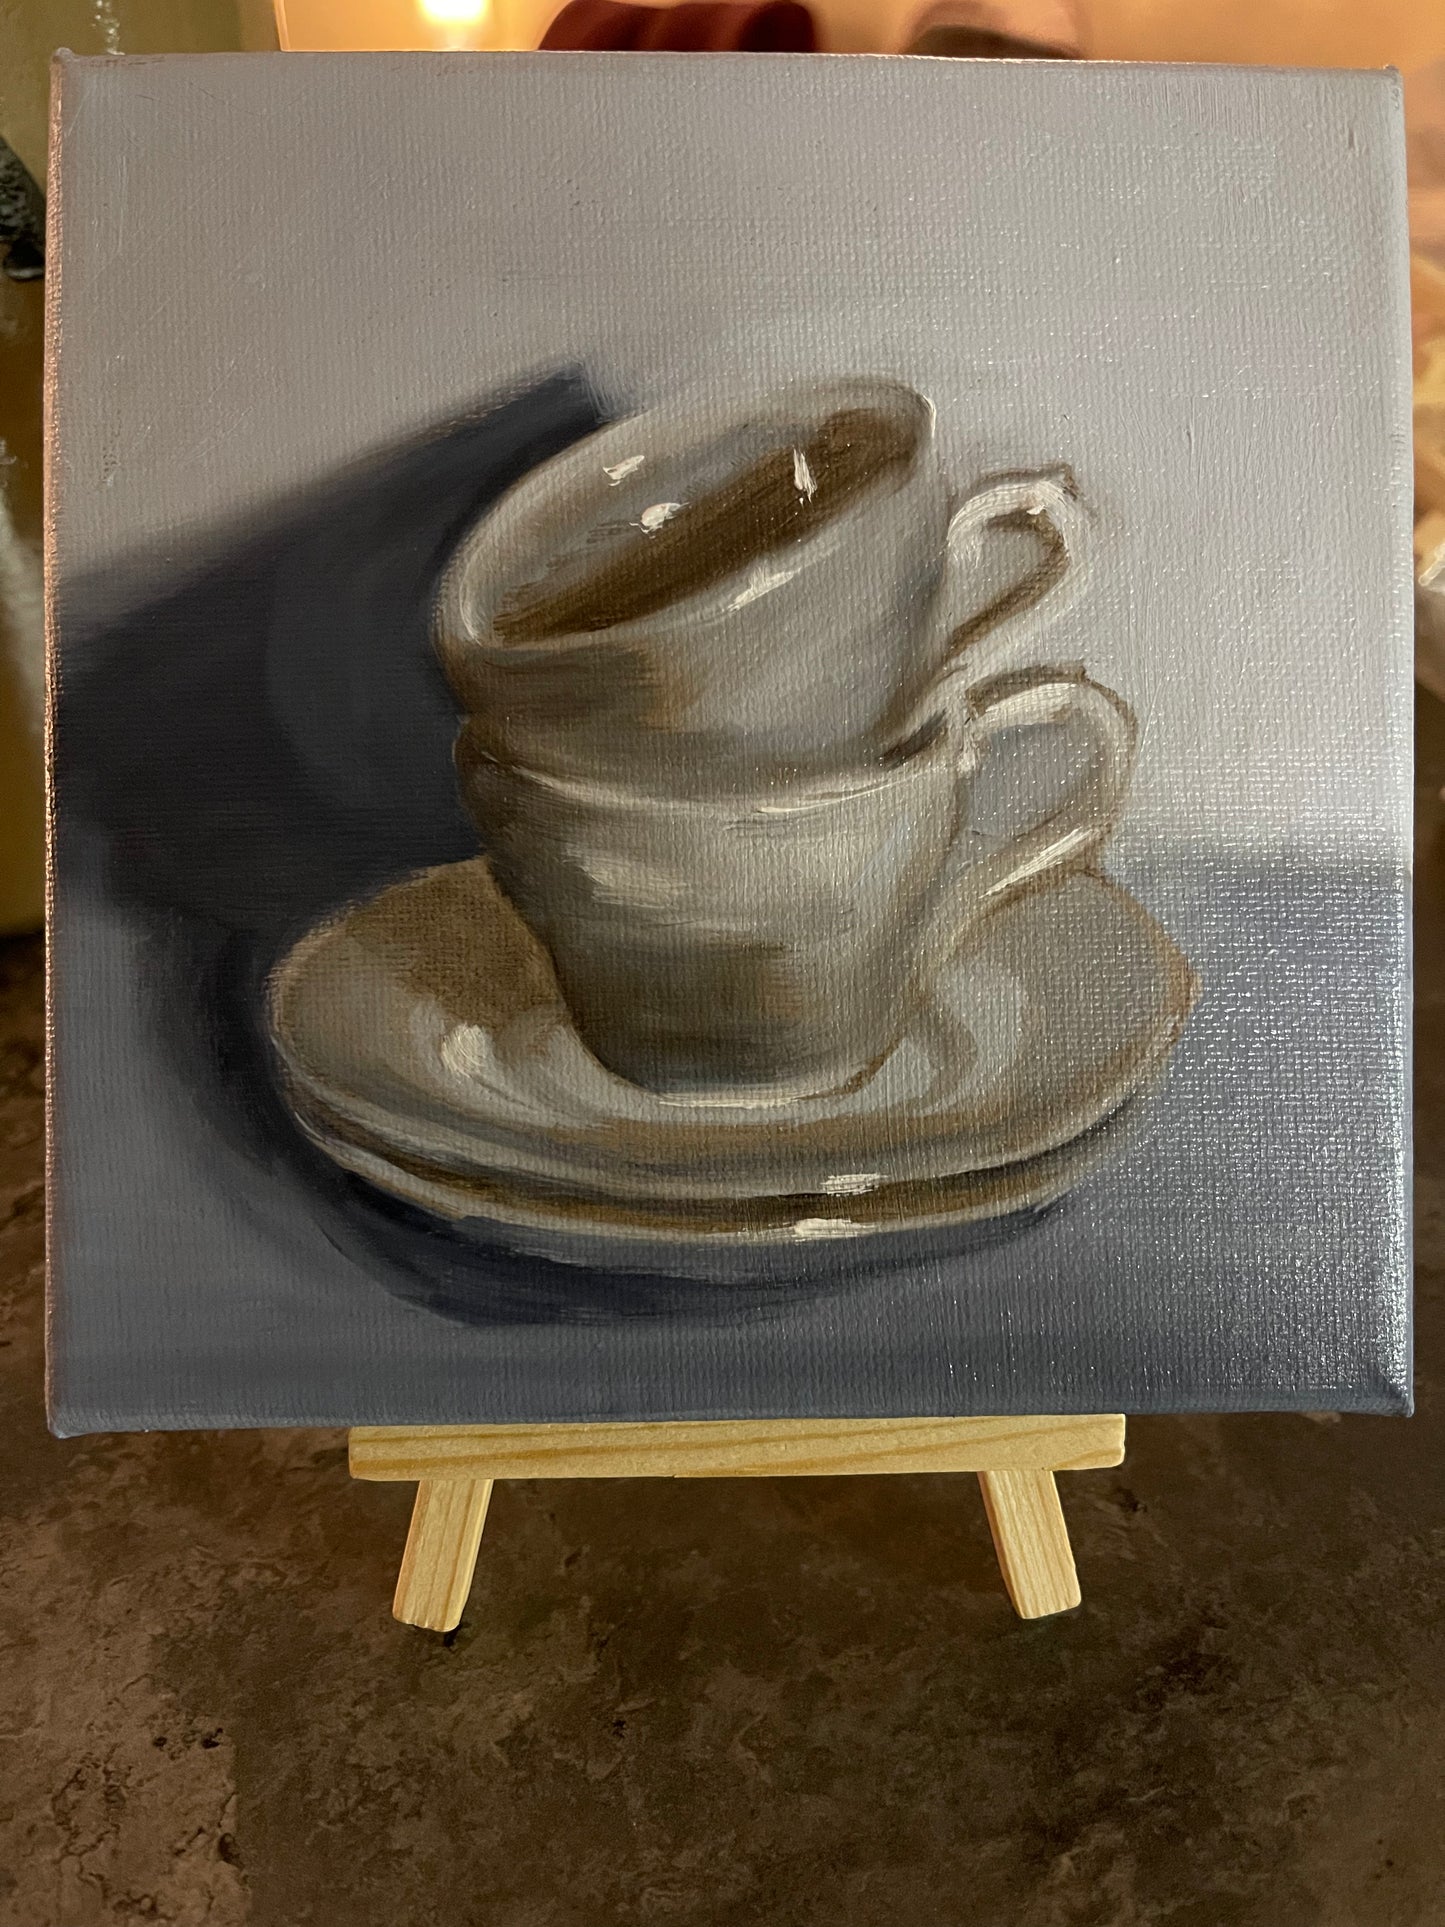 Stacked Cups Still Life | Original Oil Painting | 6 x 6 inches with optional frame